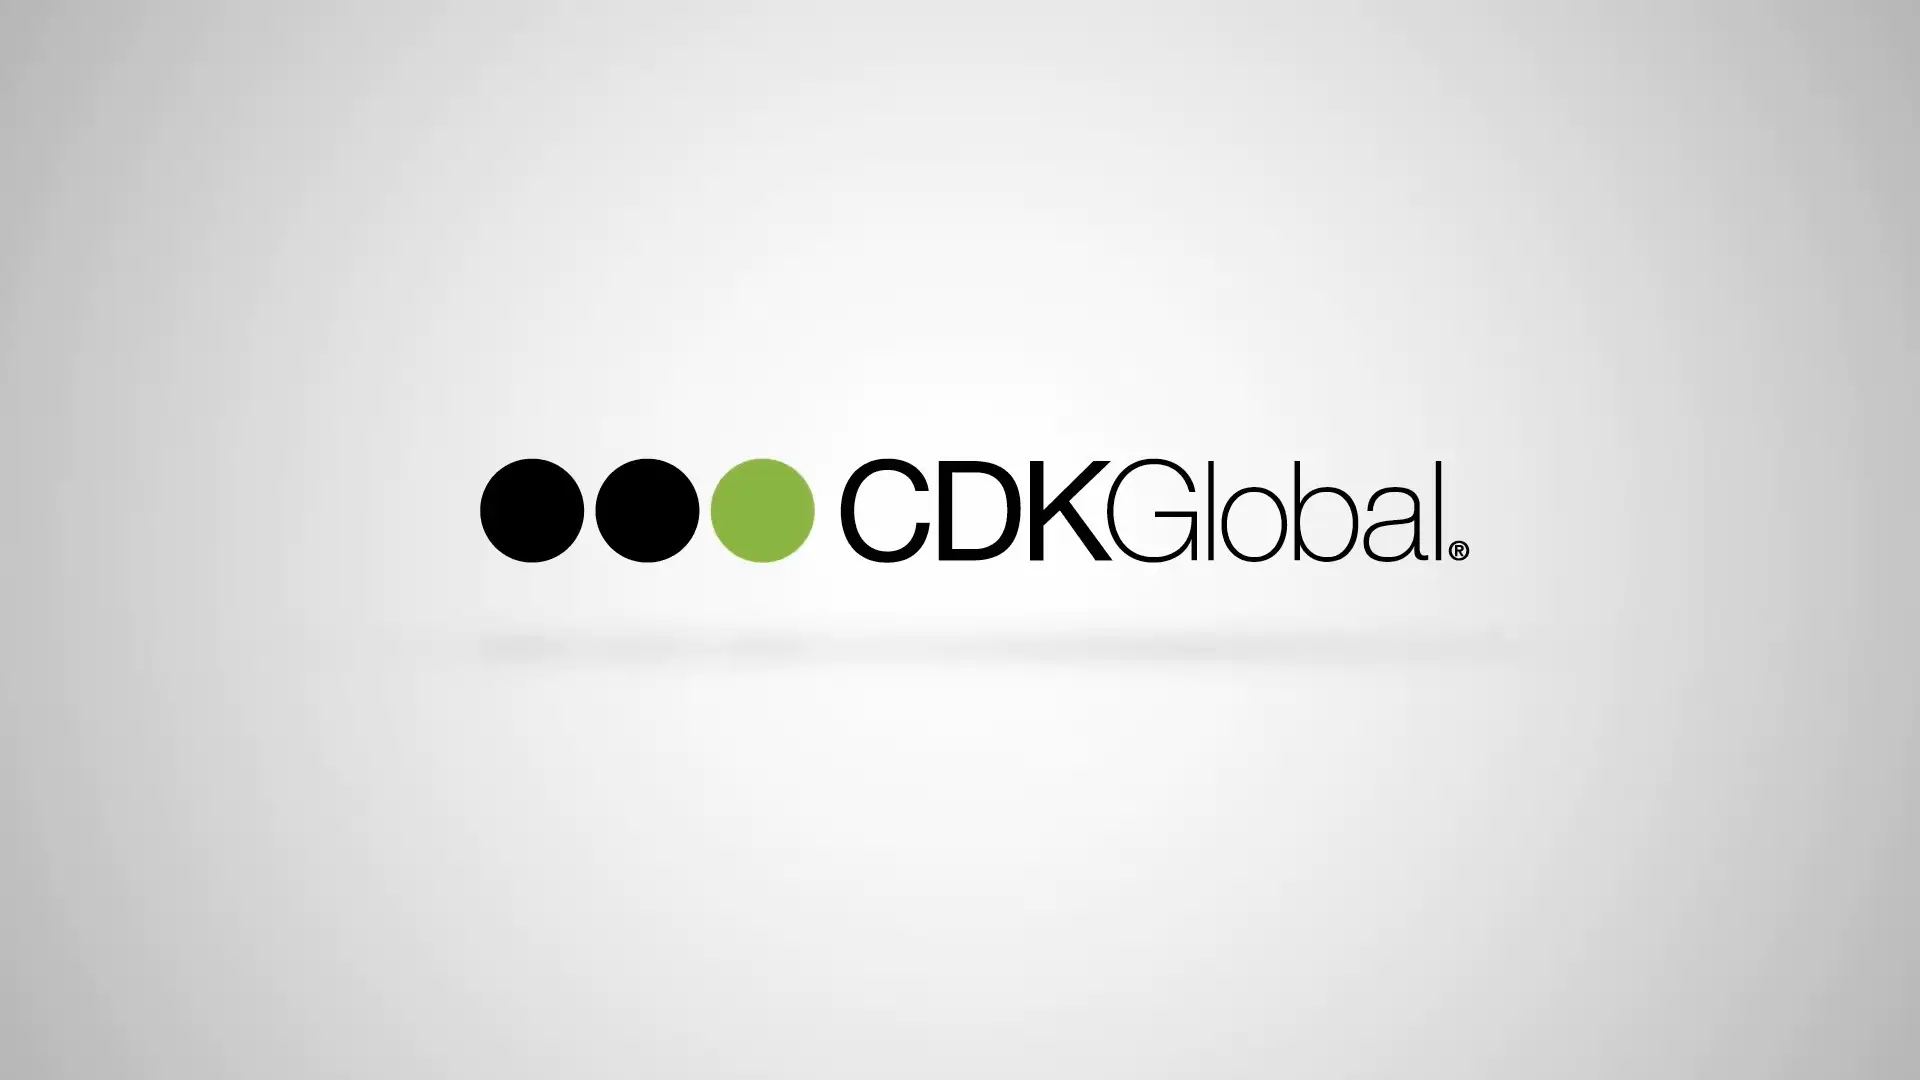 CDK Global Service Connect